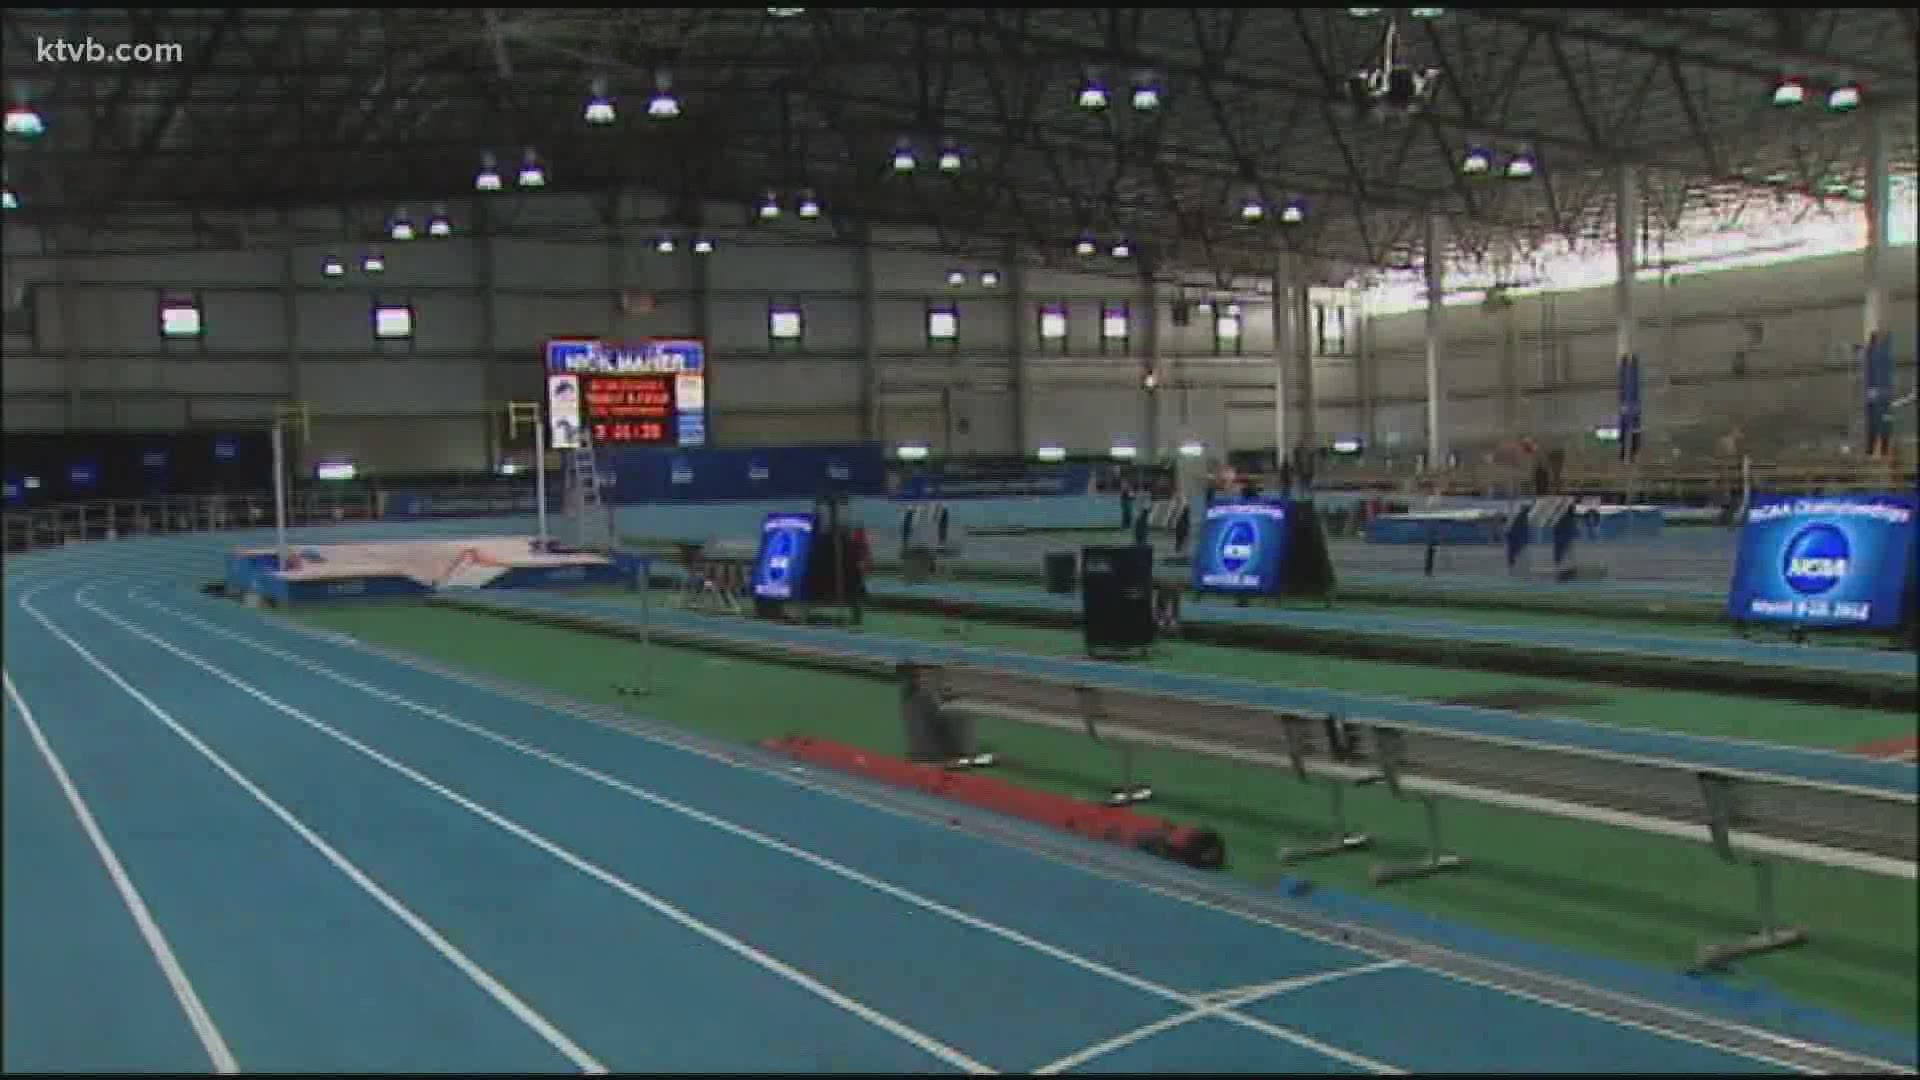 The group, led by Olympic gold medalist Stacy Dragila, is trying to start the process by acquiring the Jackson Indoor Track from Boise State University.